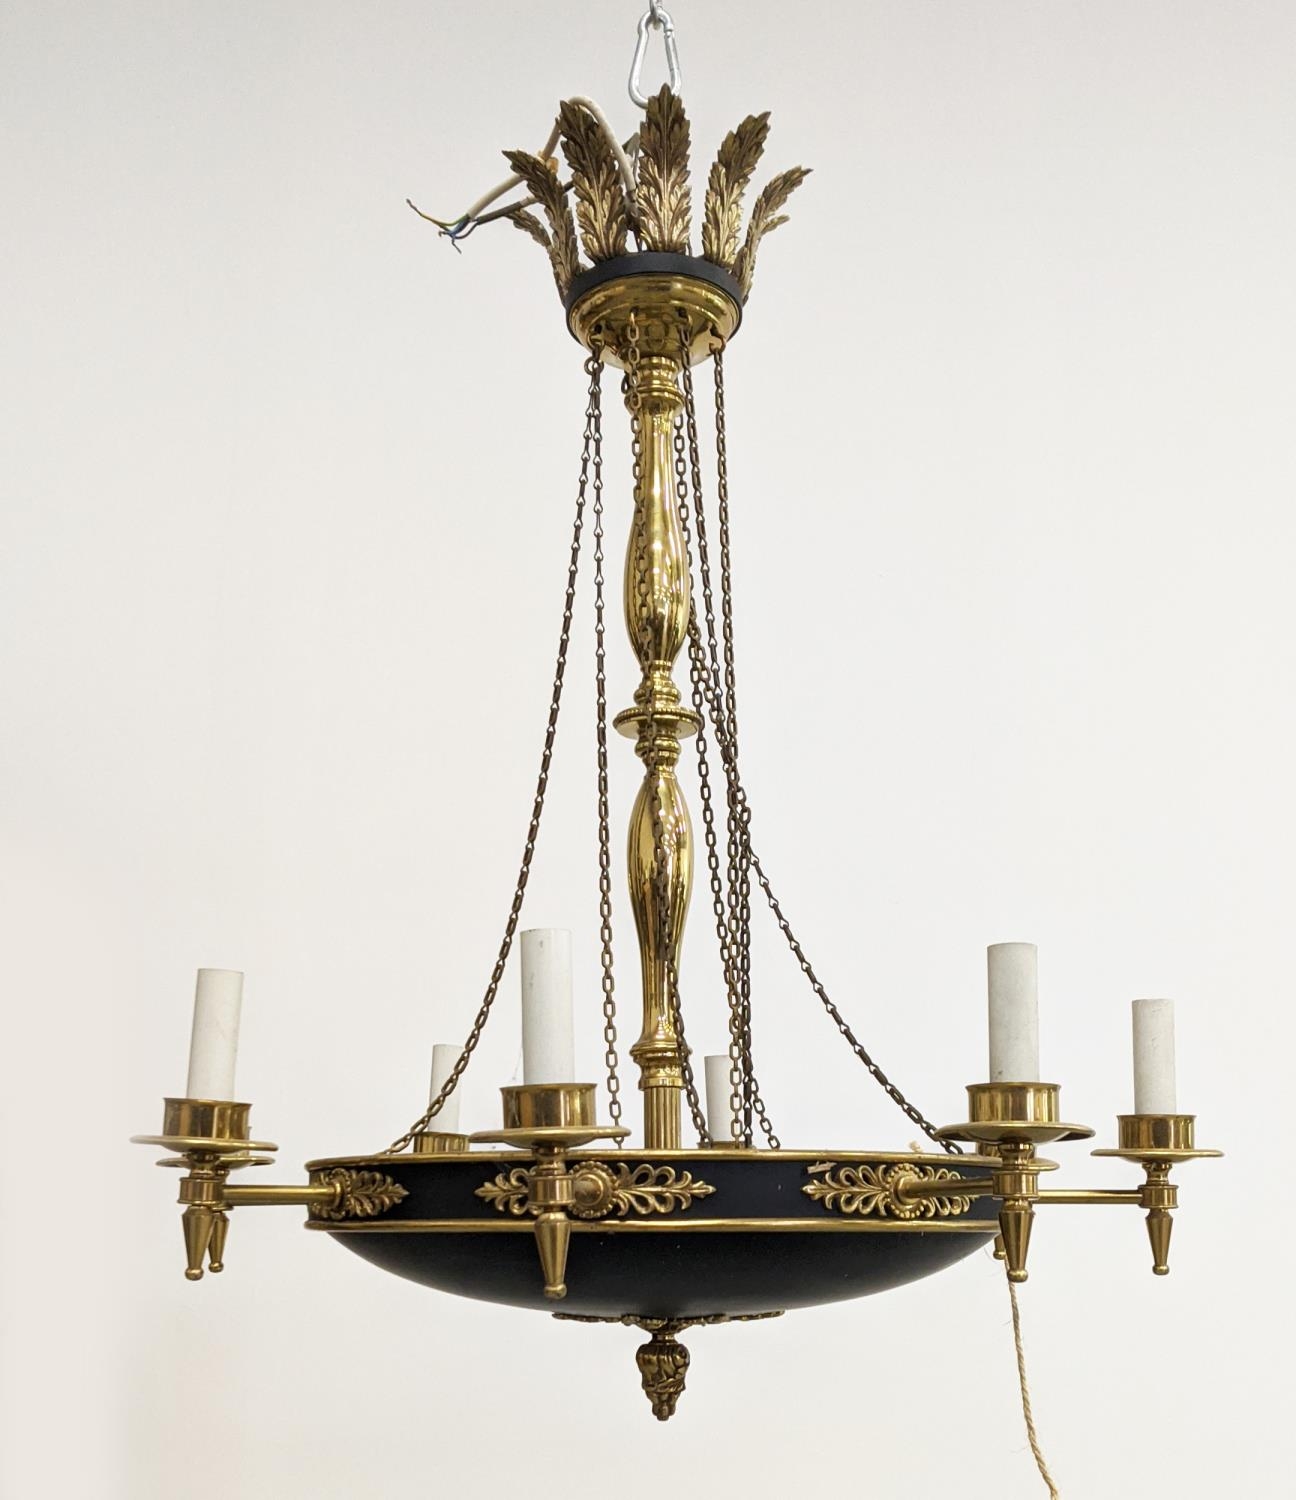 CEILING LIGHT EMPIRE STYLE, black metal and brass with acanthus leaf detail, 77cm W x 96cm H approx. - Image 4 of 14